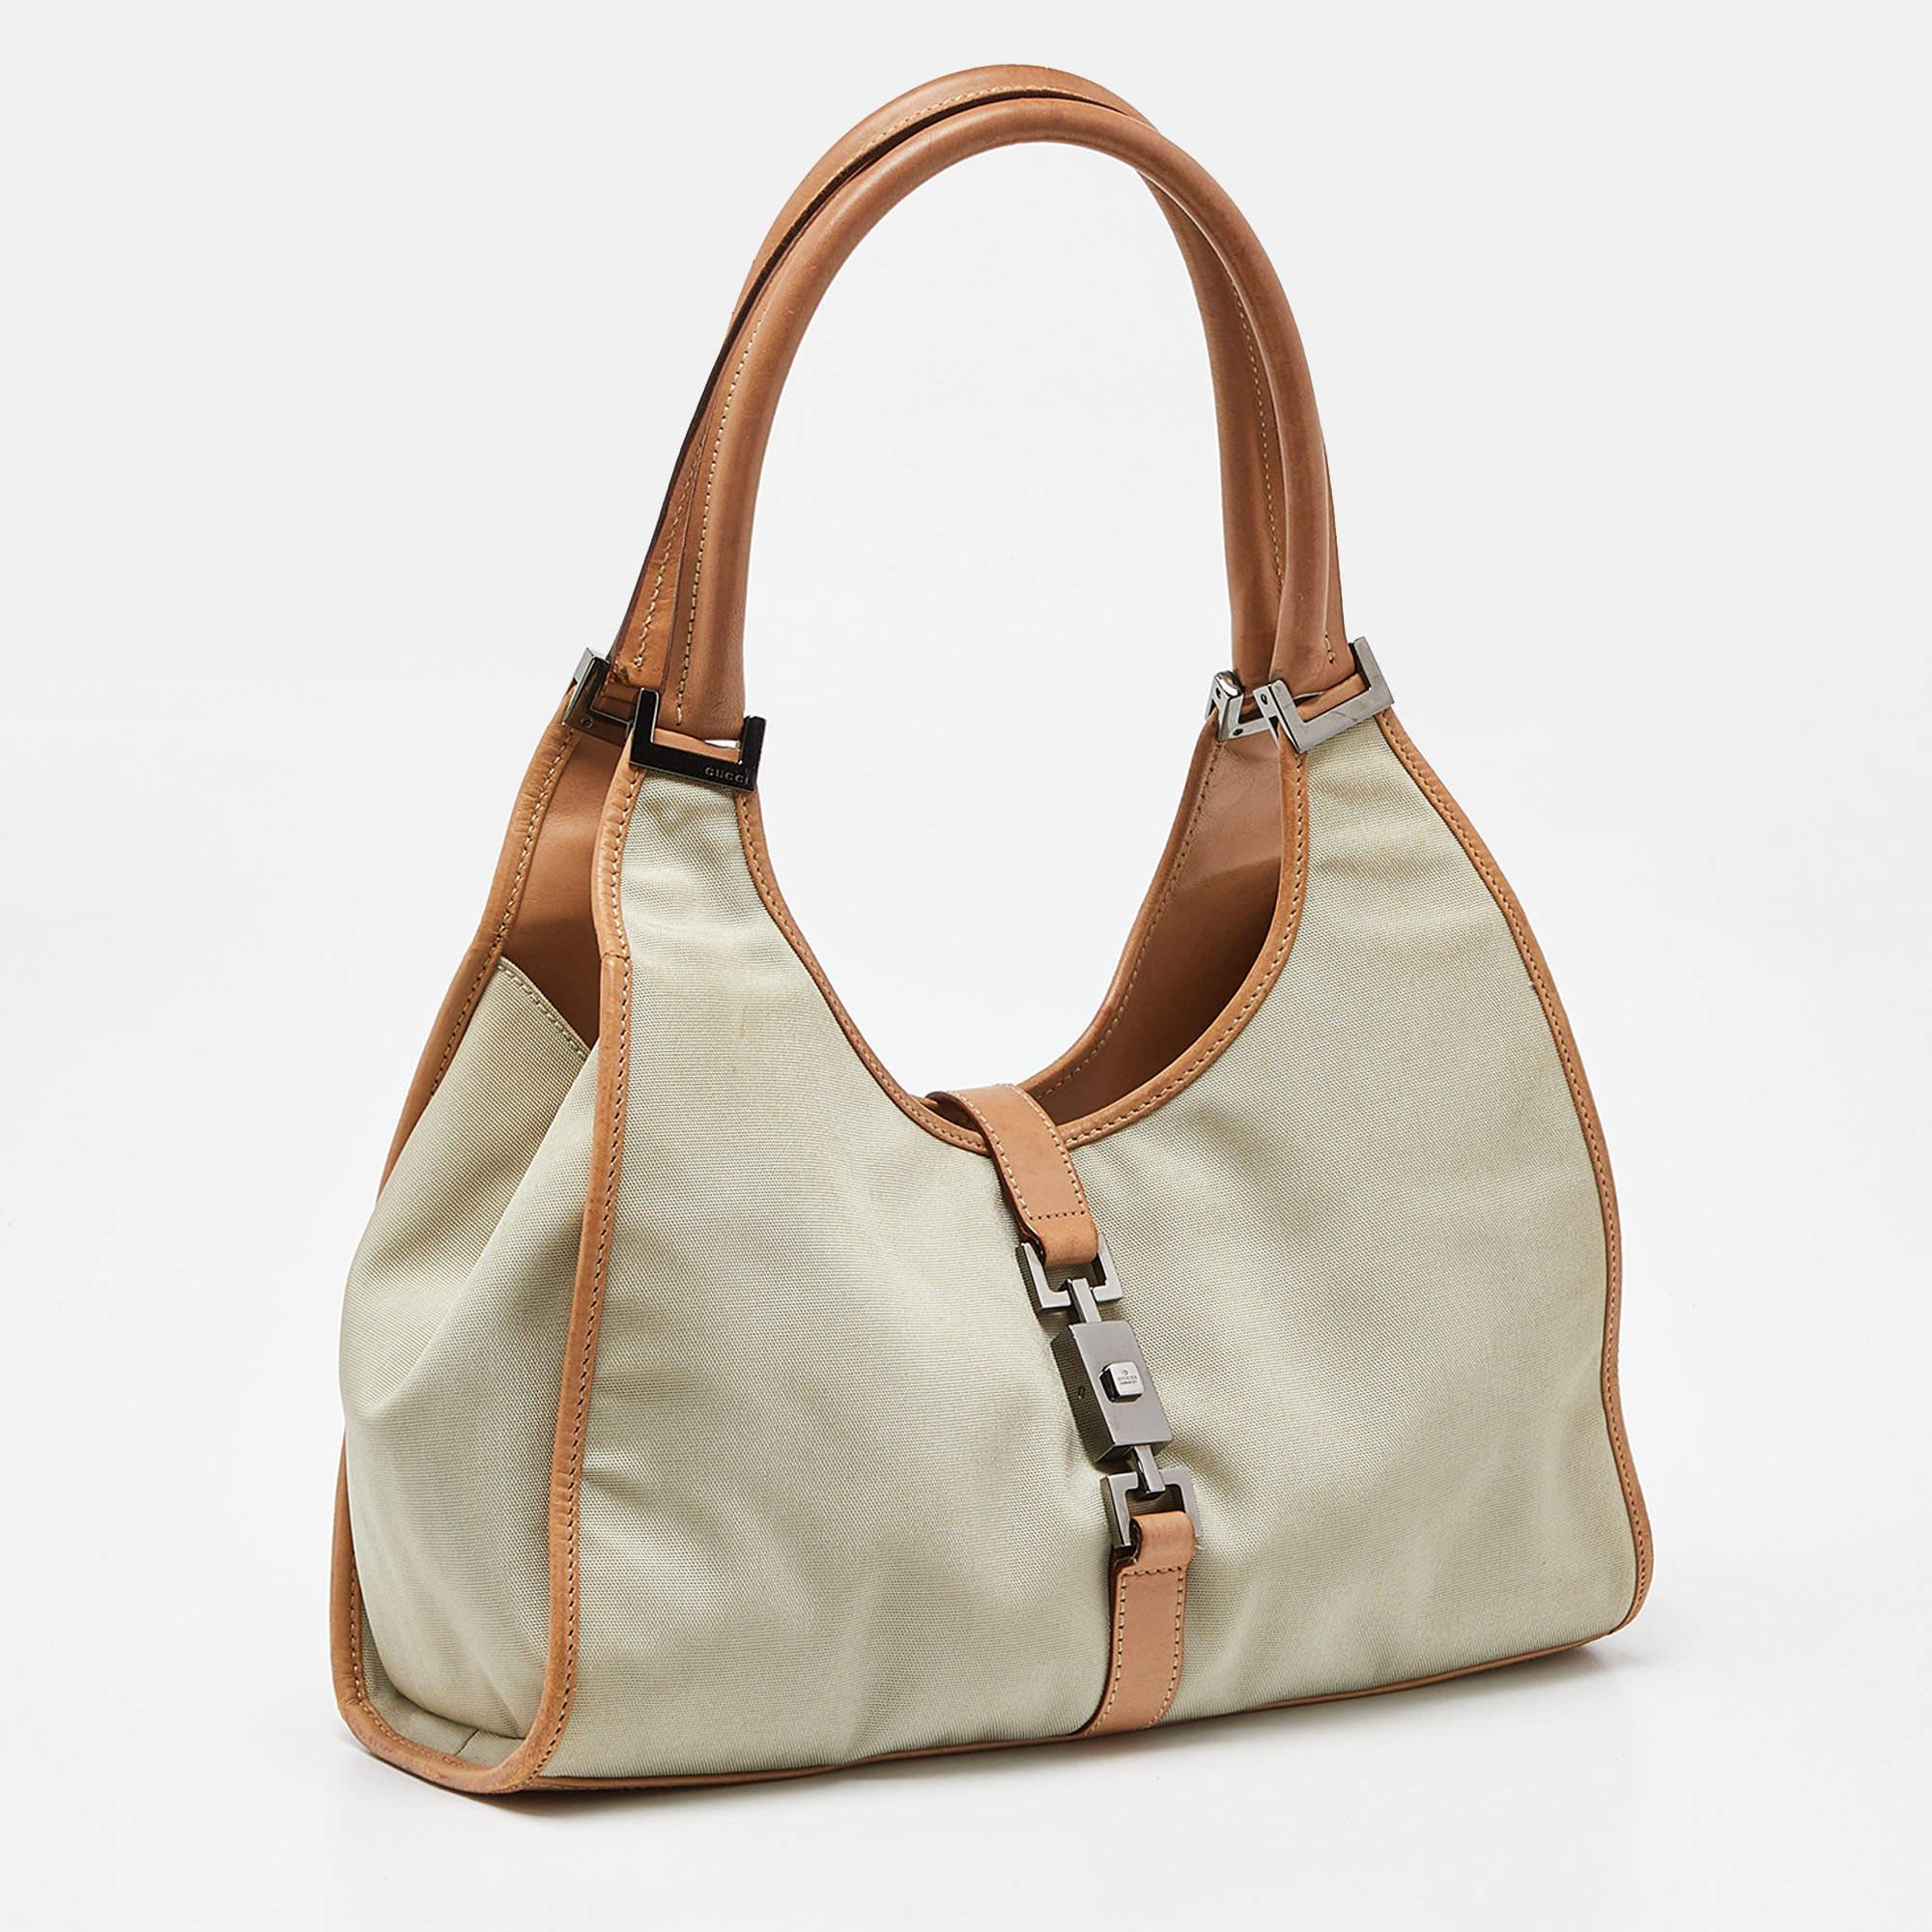 Gucci Beige/Tan Canvas and Leather Jackie Tote In Good Condition For Sale In Dubai, Al Qouz 2